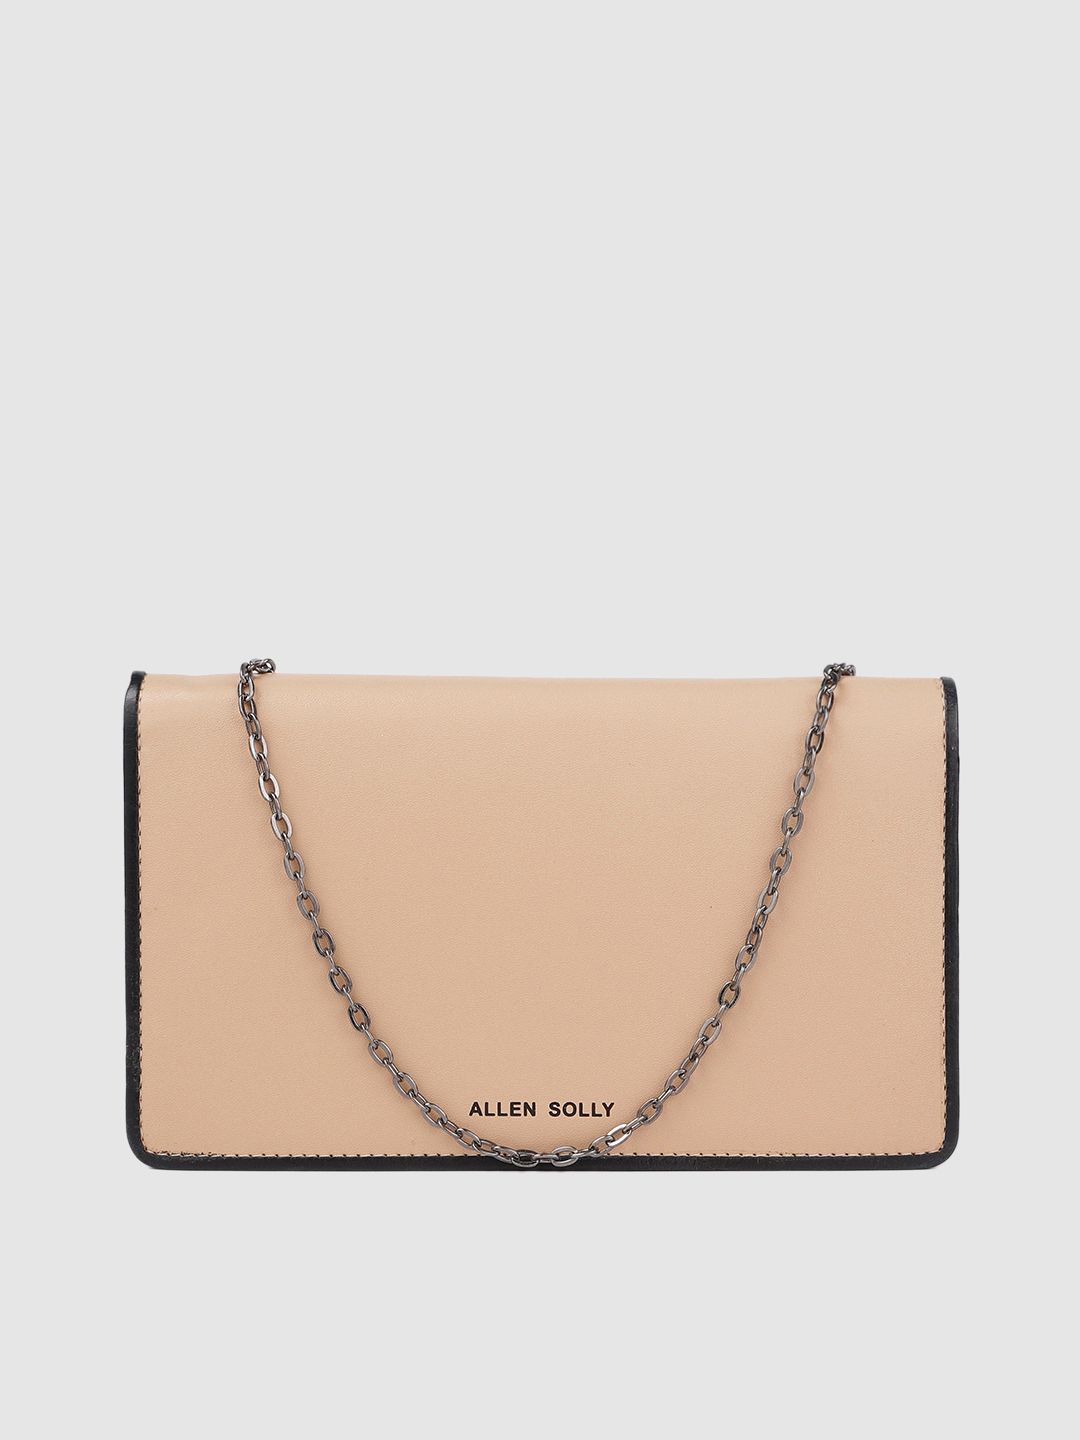 Allen Solly Beige Solid Structured Sling Bag Price in India